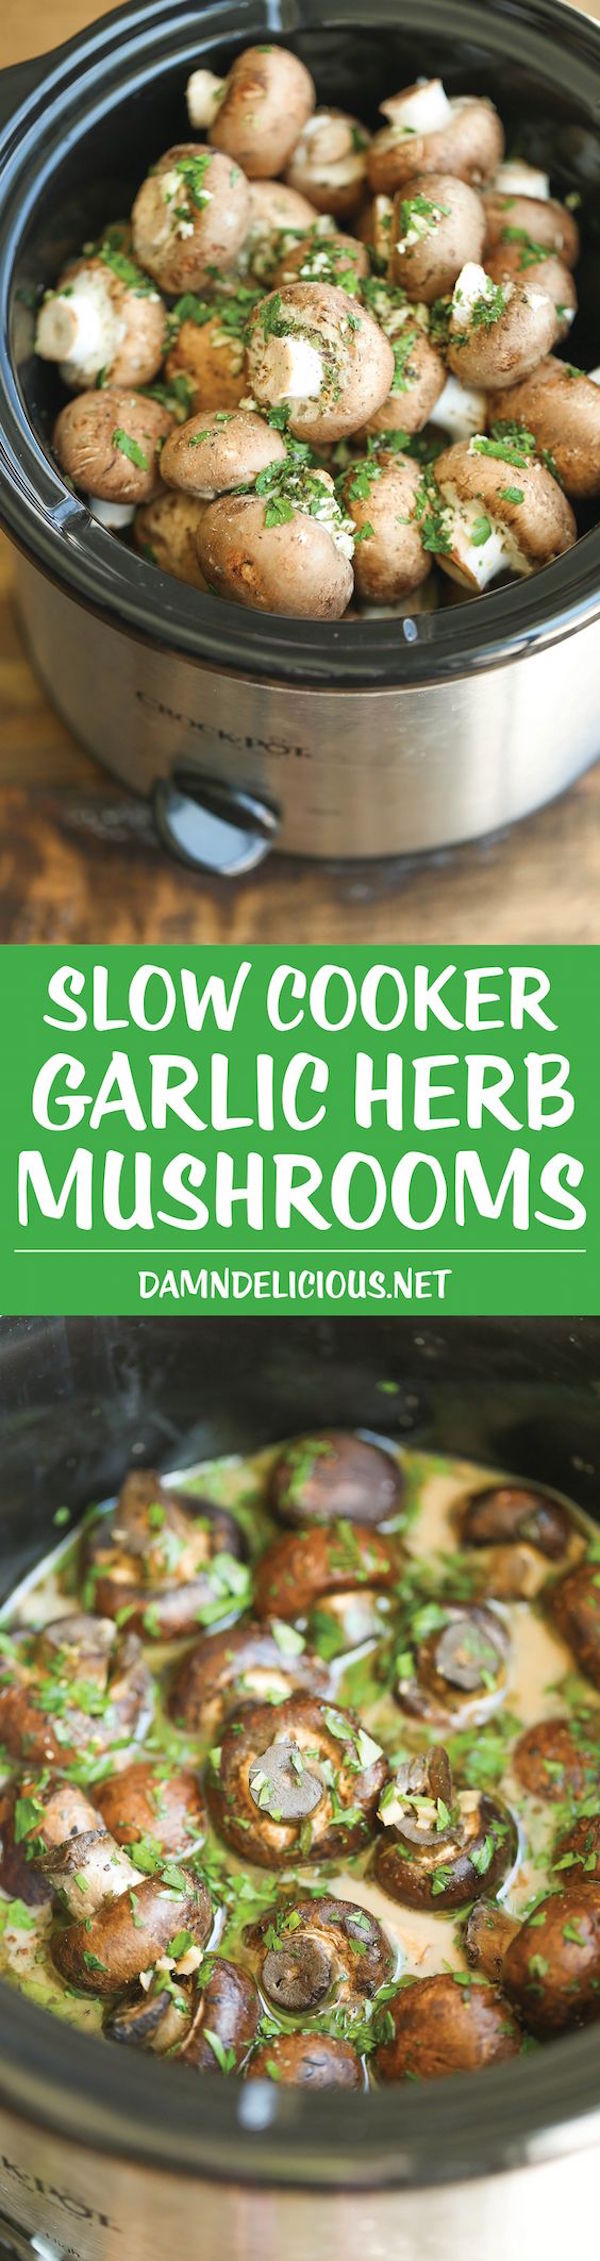 Slow Cooker Garlic Herb Mushrooms - The best and EASIEST way to make mushrooms - in a crockpot with garlic, herbs and of course, butter!